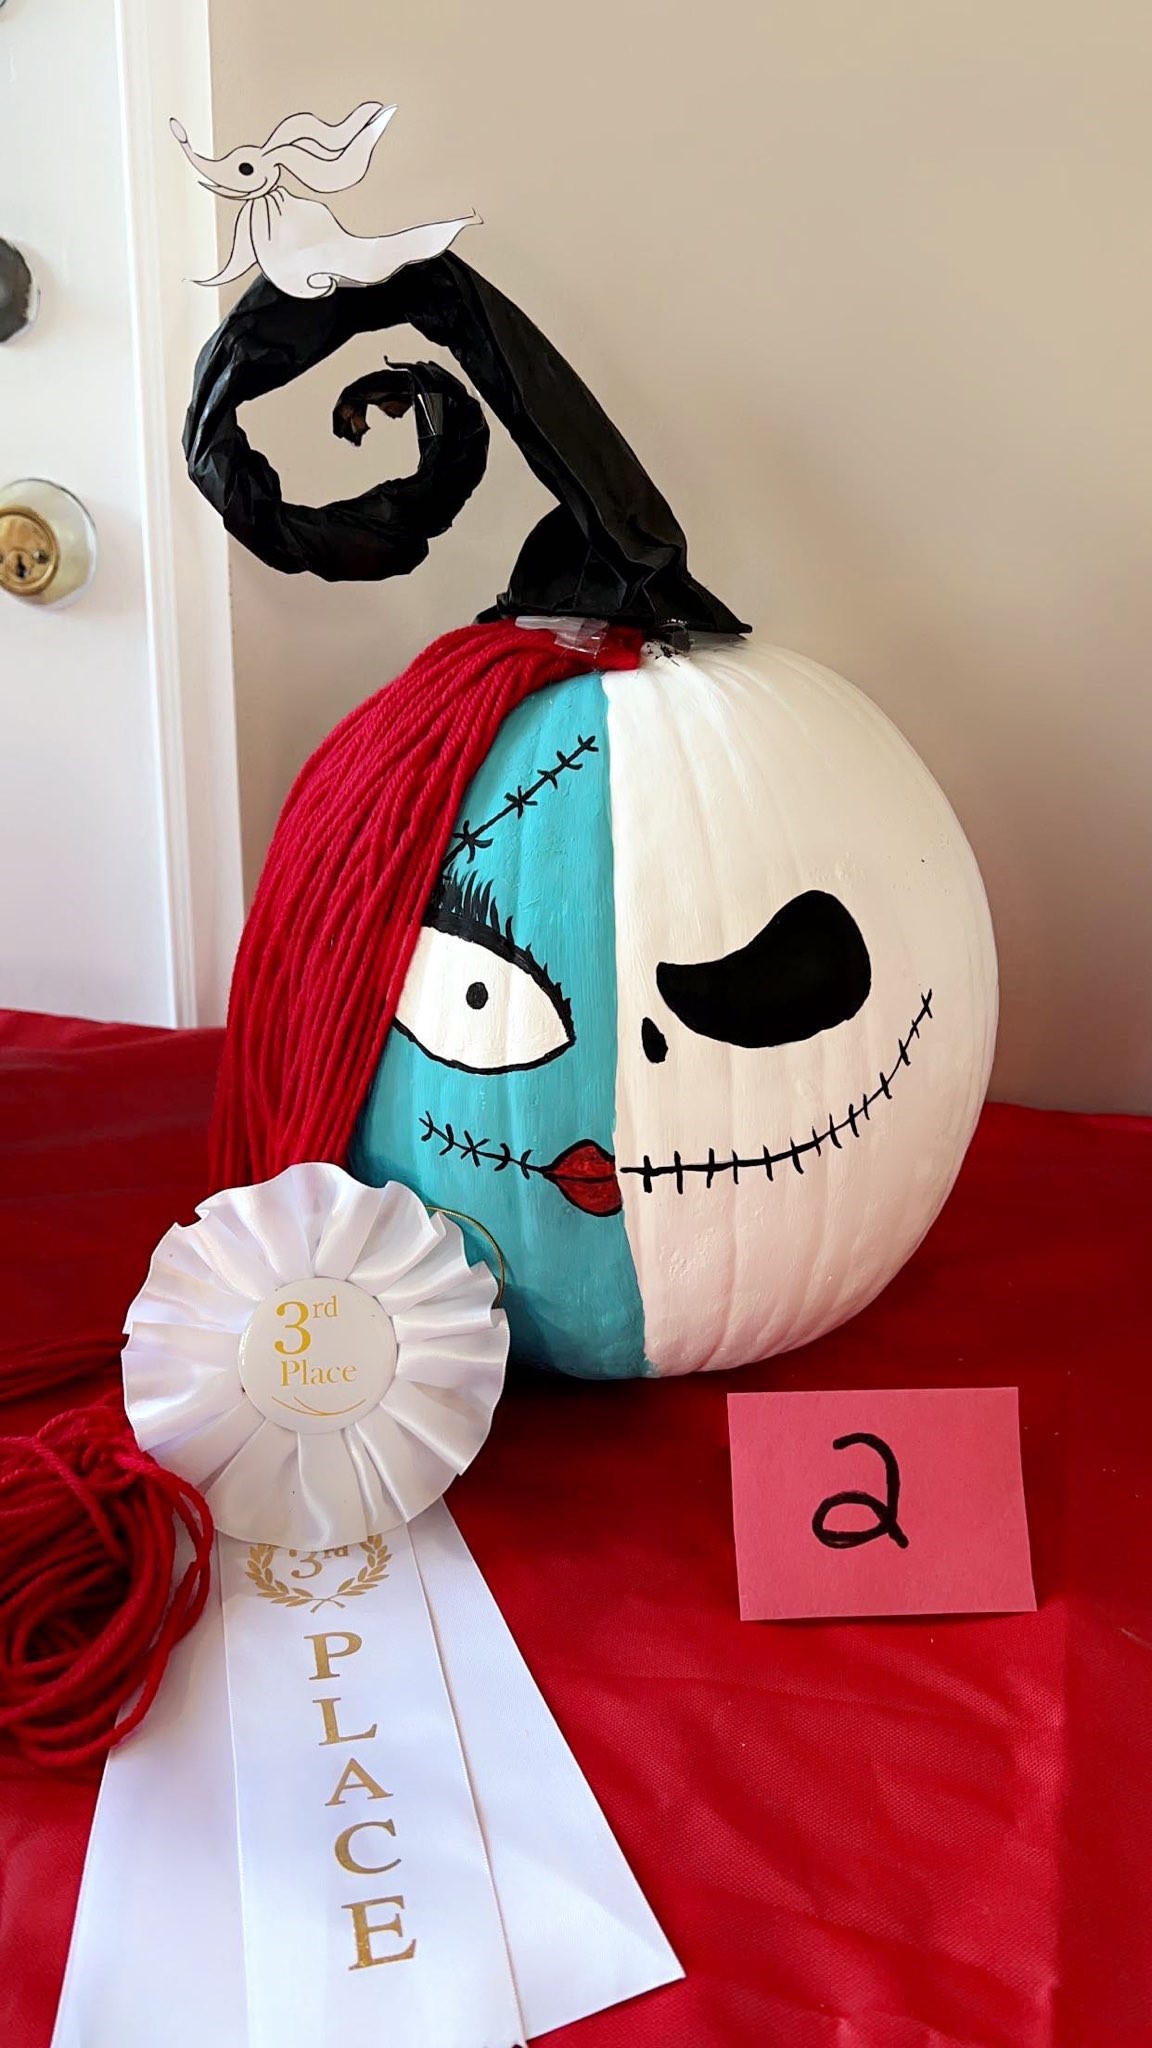 Pumpkin painting contest winners! Whitney Smith State Farm Insurance Agent